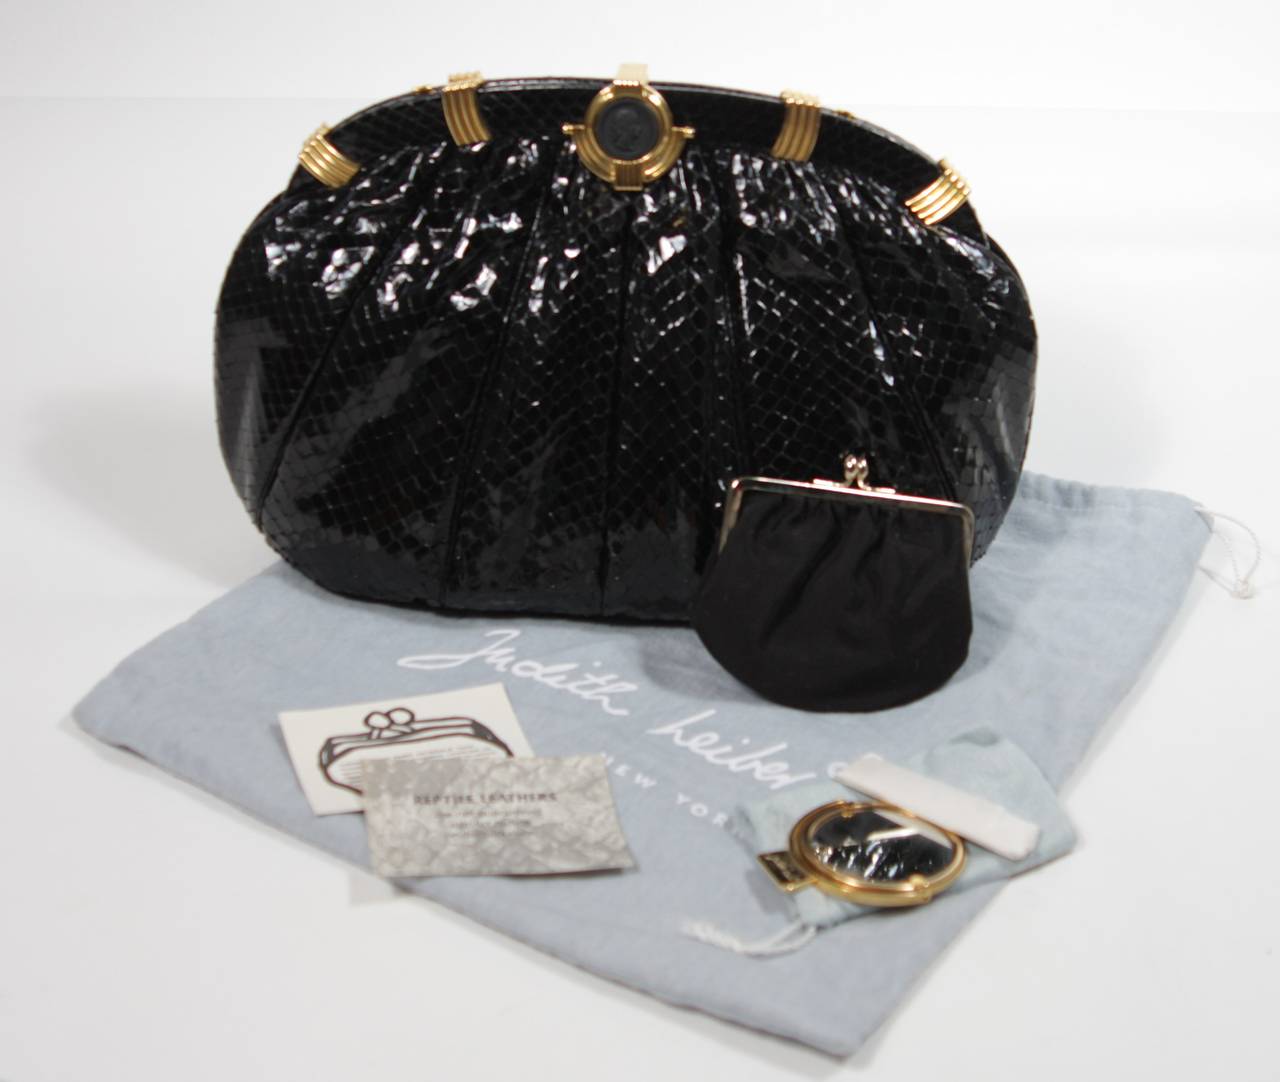 Women's Judith Leiber Black Snakeskin Purse with Cameo Closure and Gold Hardware